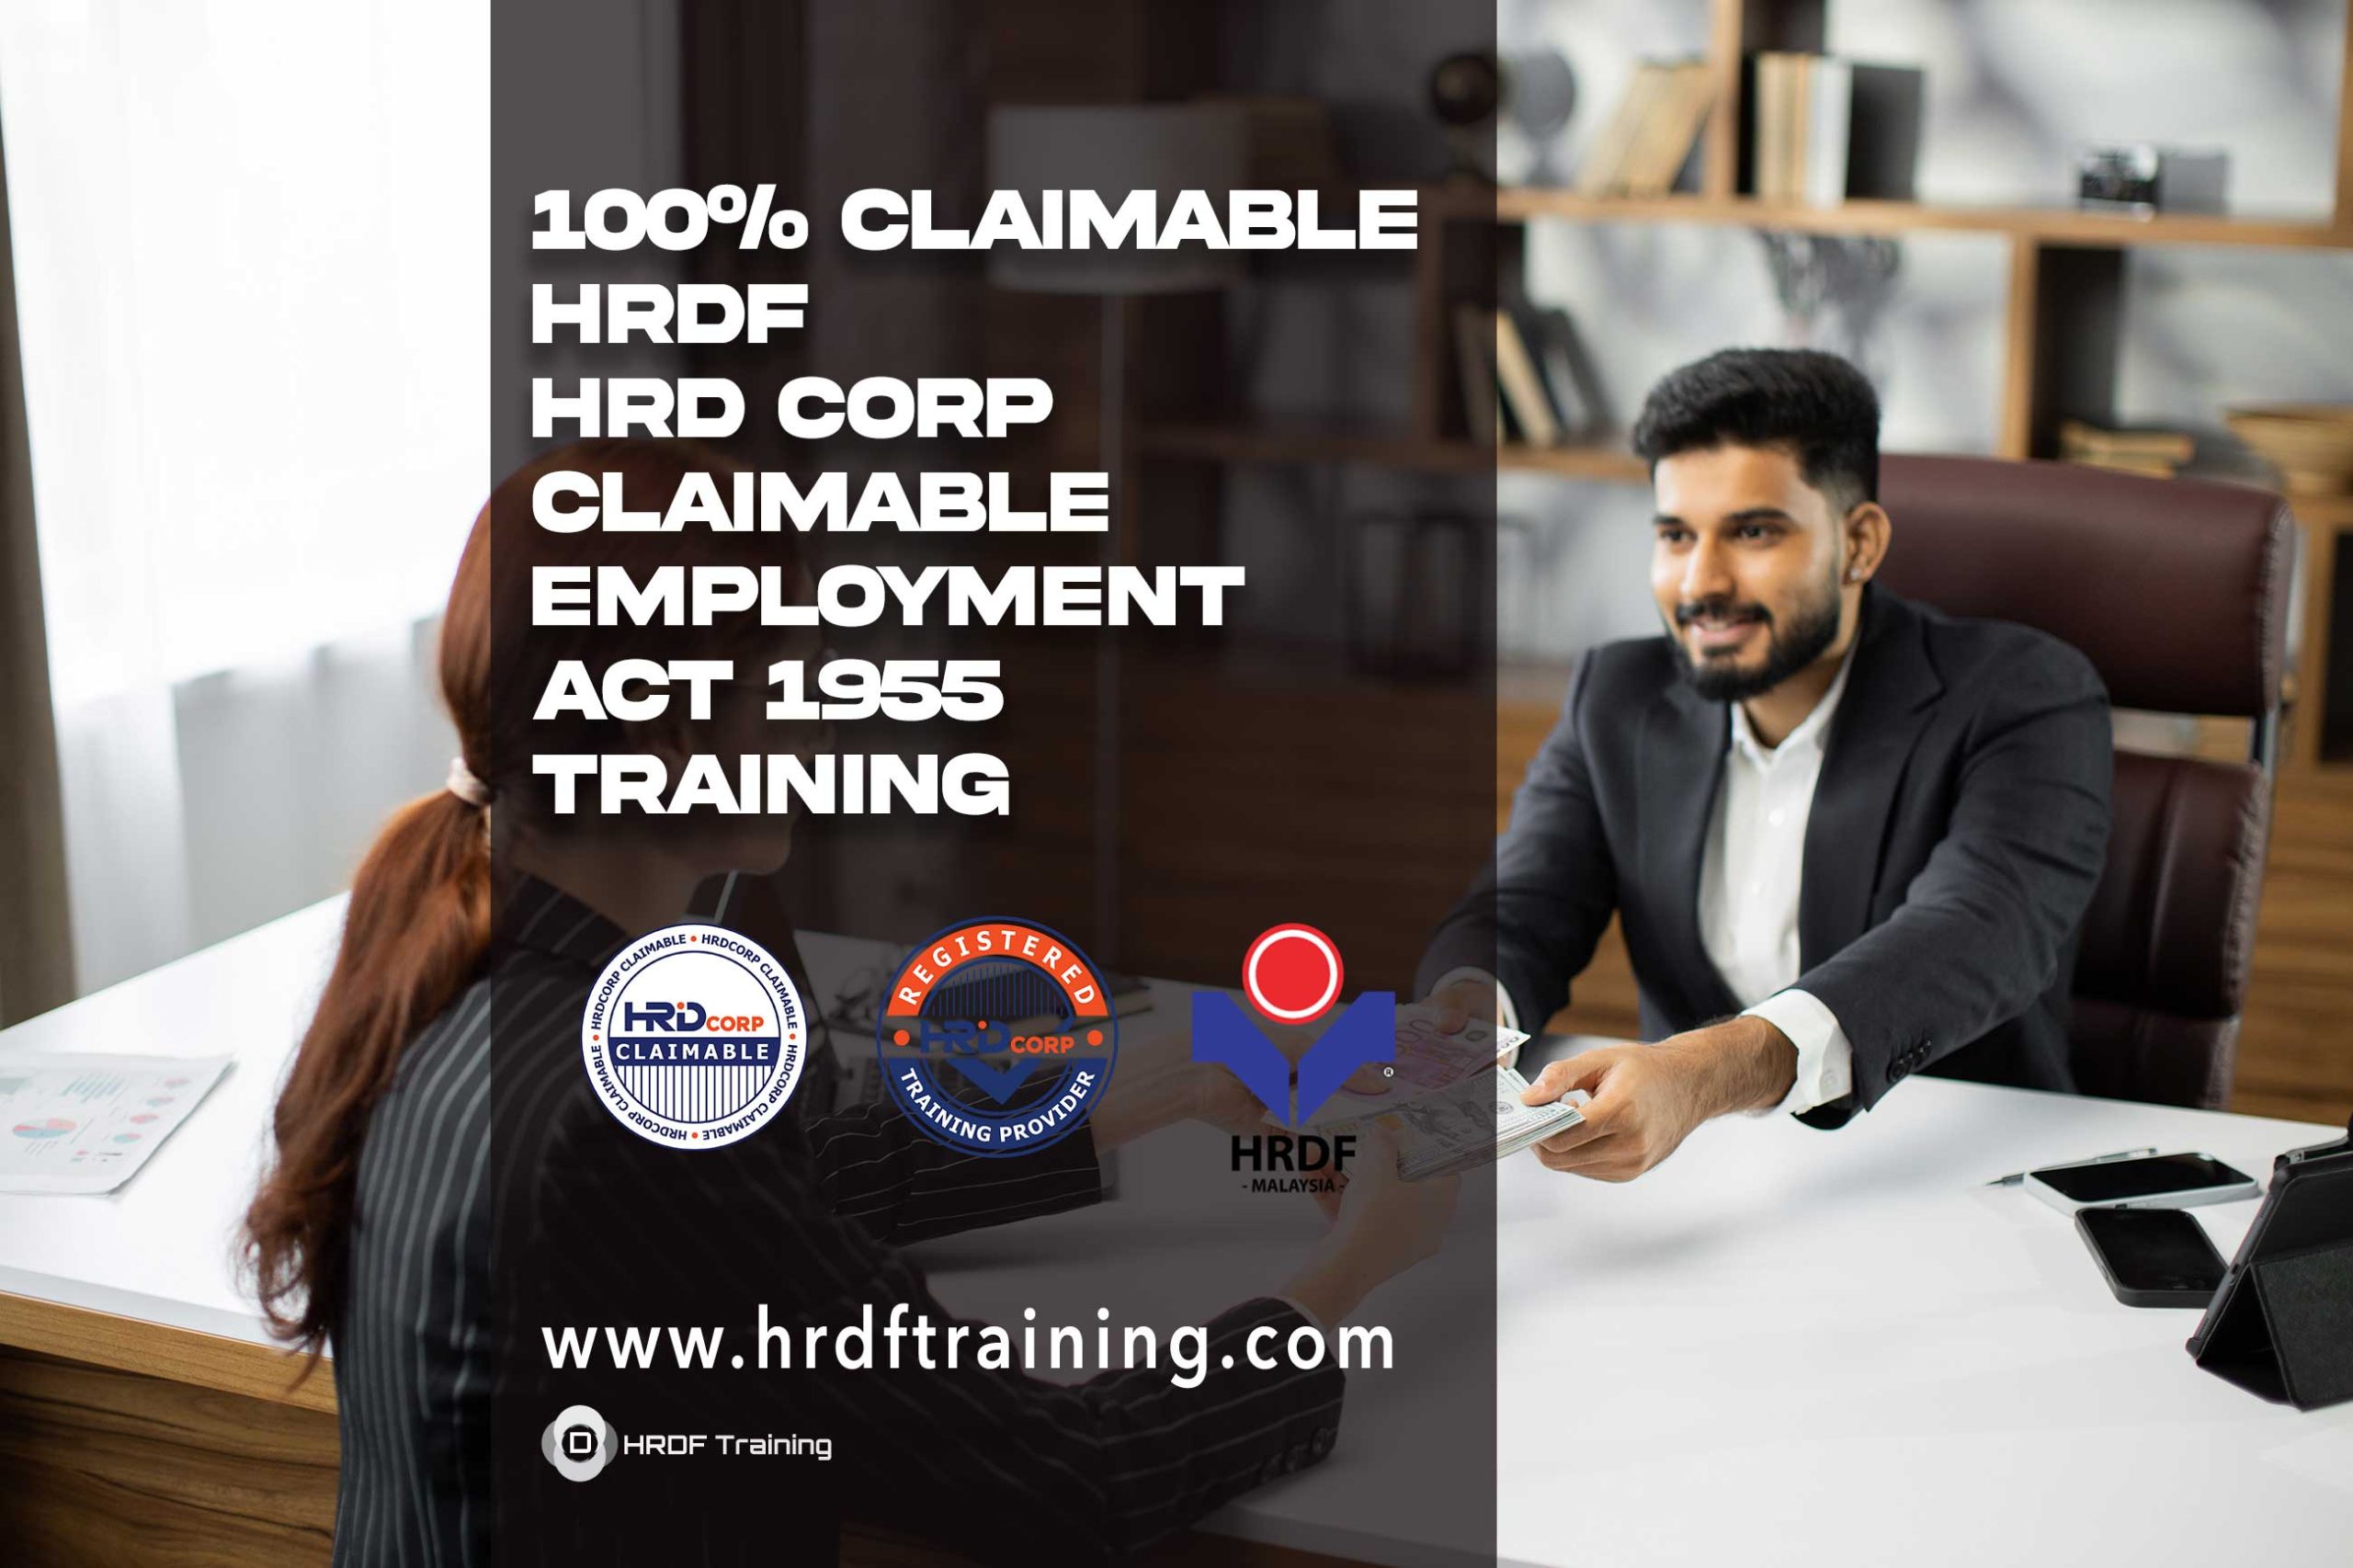 HRDF-HRD-Corp-Claimable-Employment-Act-1955-Training